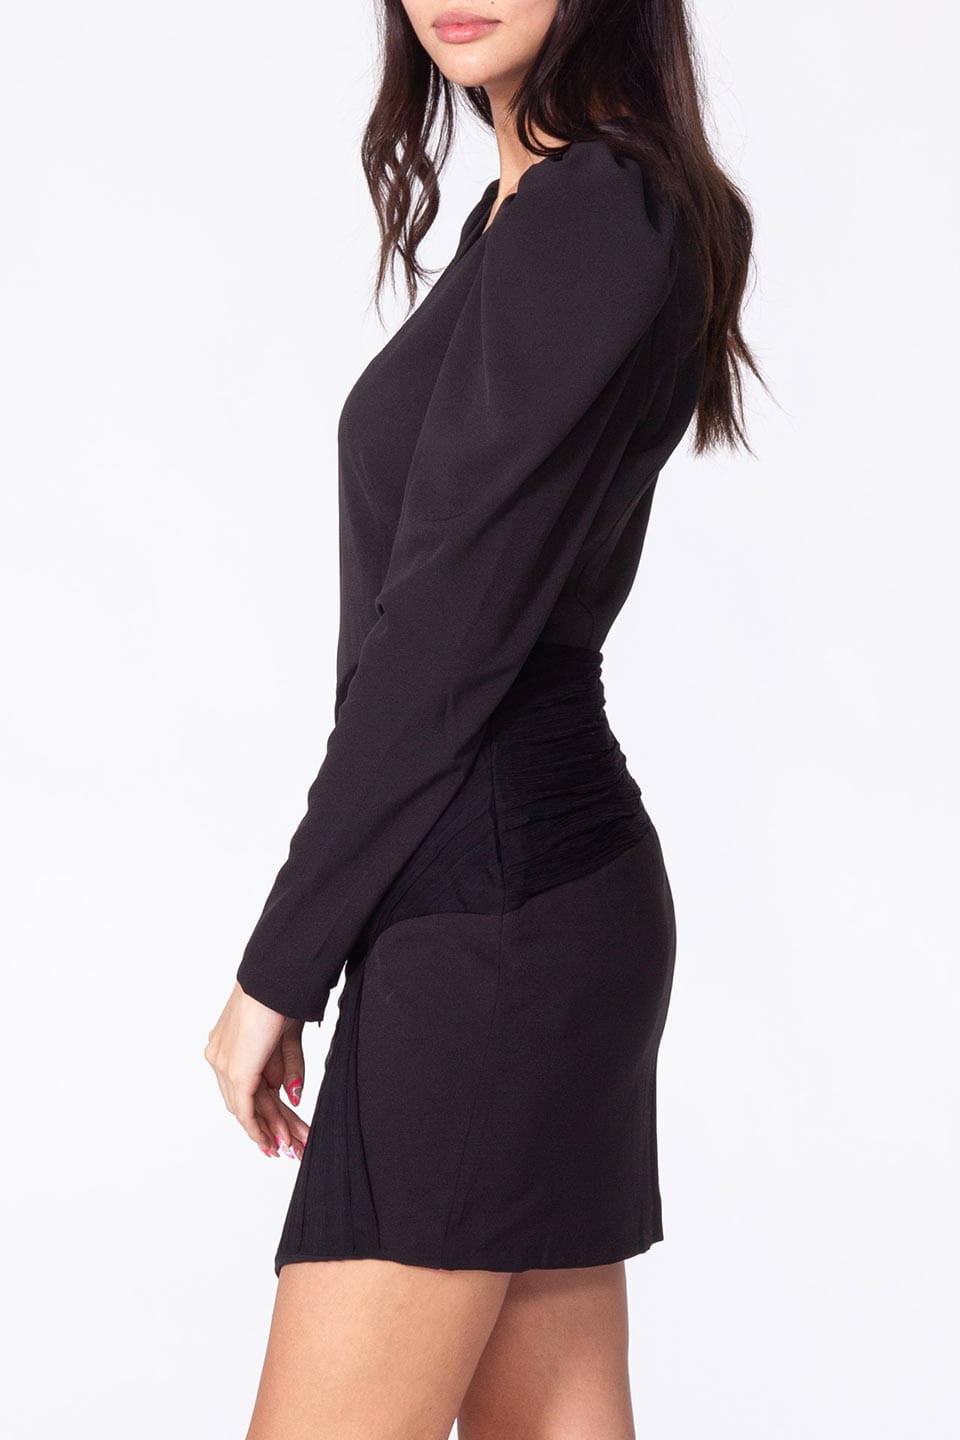 Thumbnail for Product gallery 6, Violante nessi seraphine dress side